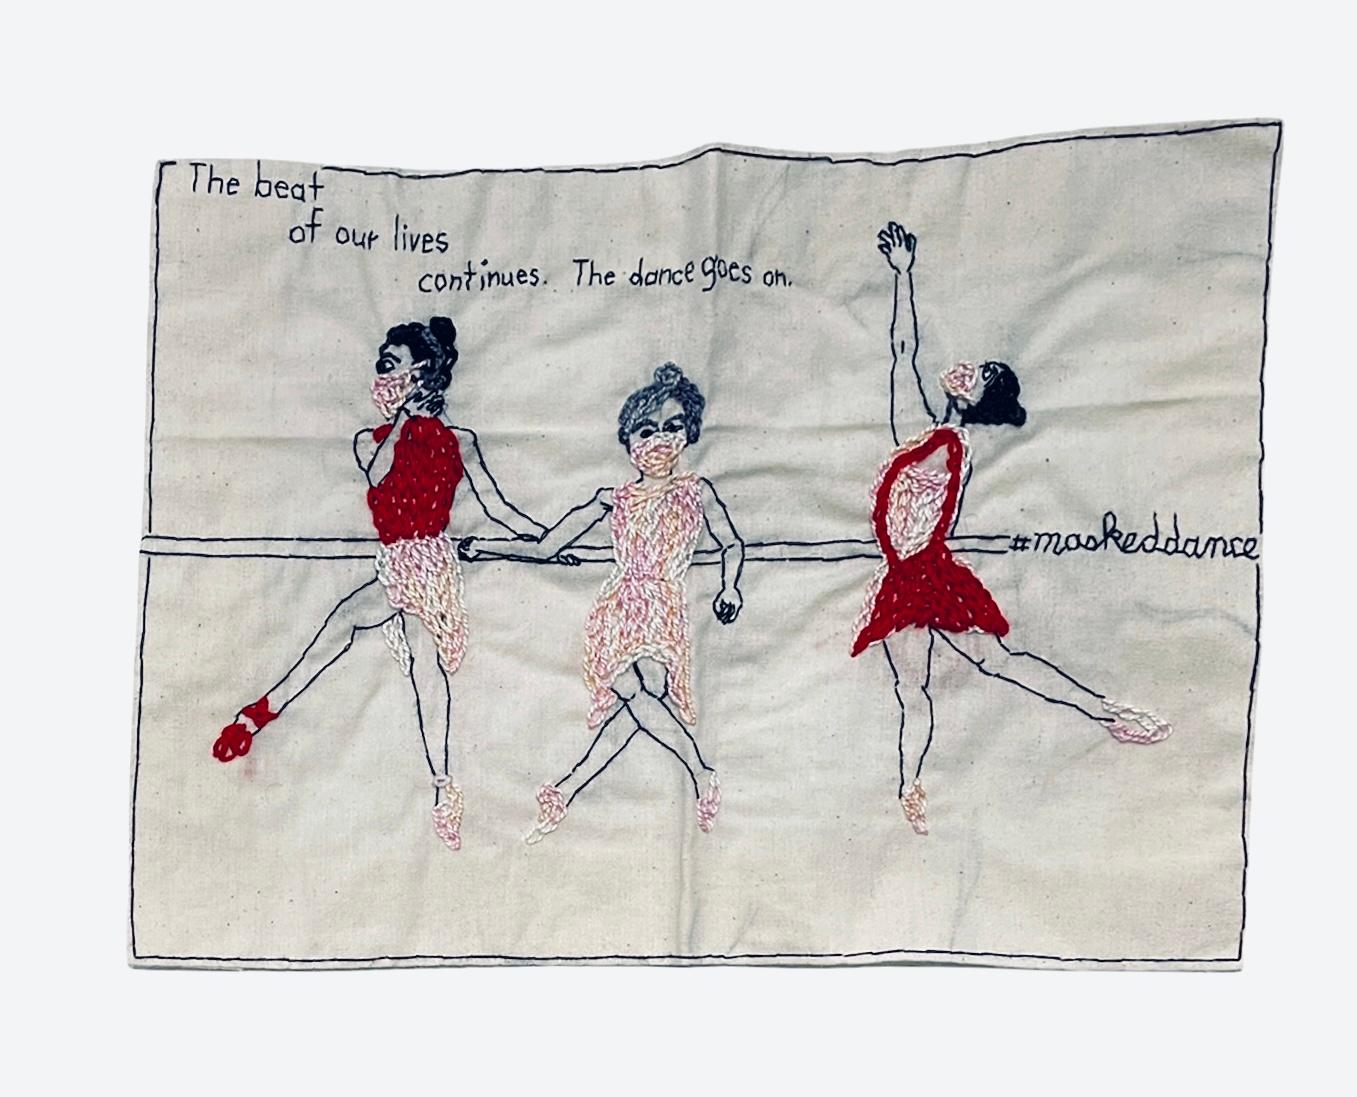 The dance goes on - love narrative embroidery on vintage fabric with ballerinas - Mixed Media Art by Iviva Olenick